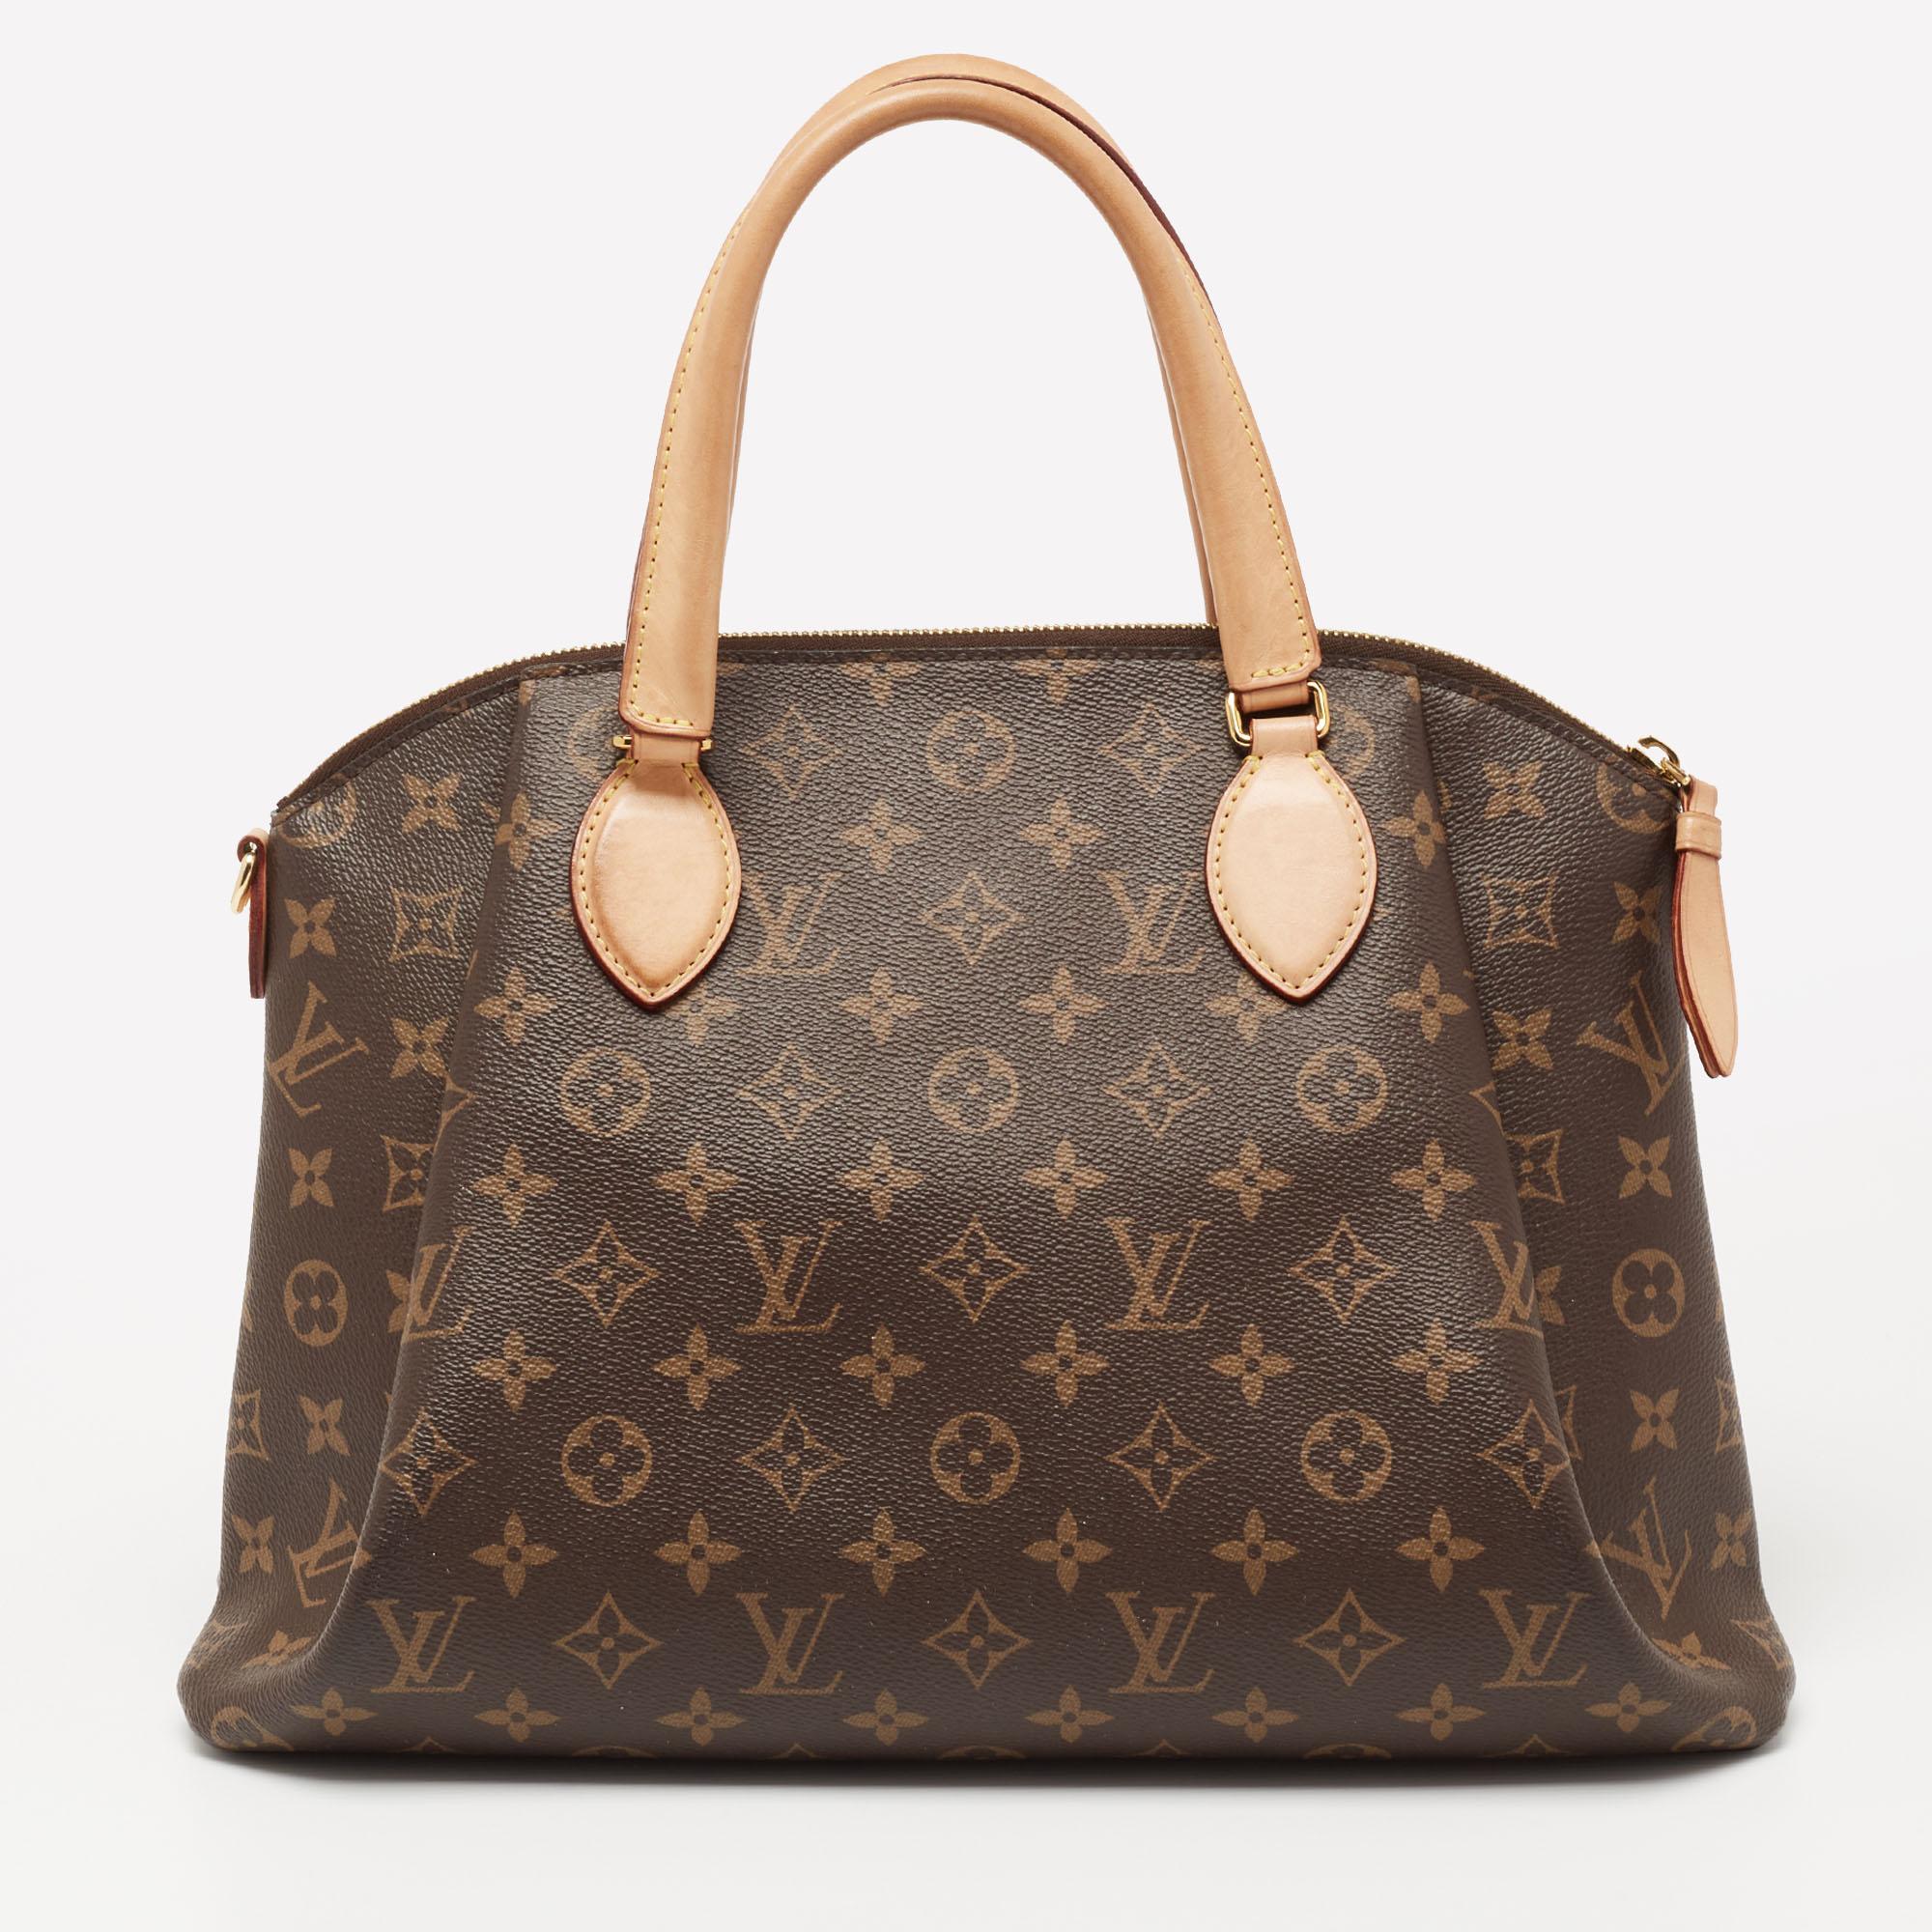 The Rivoli bag by Louis Vuitton has an undeniably appealing shape. This one is crafted from coated canvas and leather. It has a sturdy structure and the design includes a padlock on the front, two handles, and a spacious Alcantara